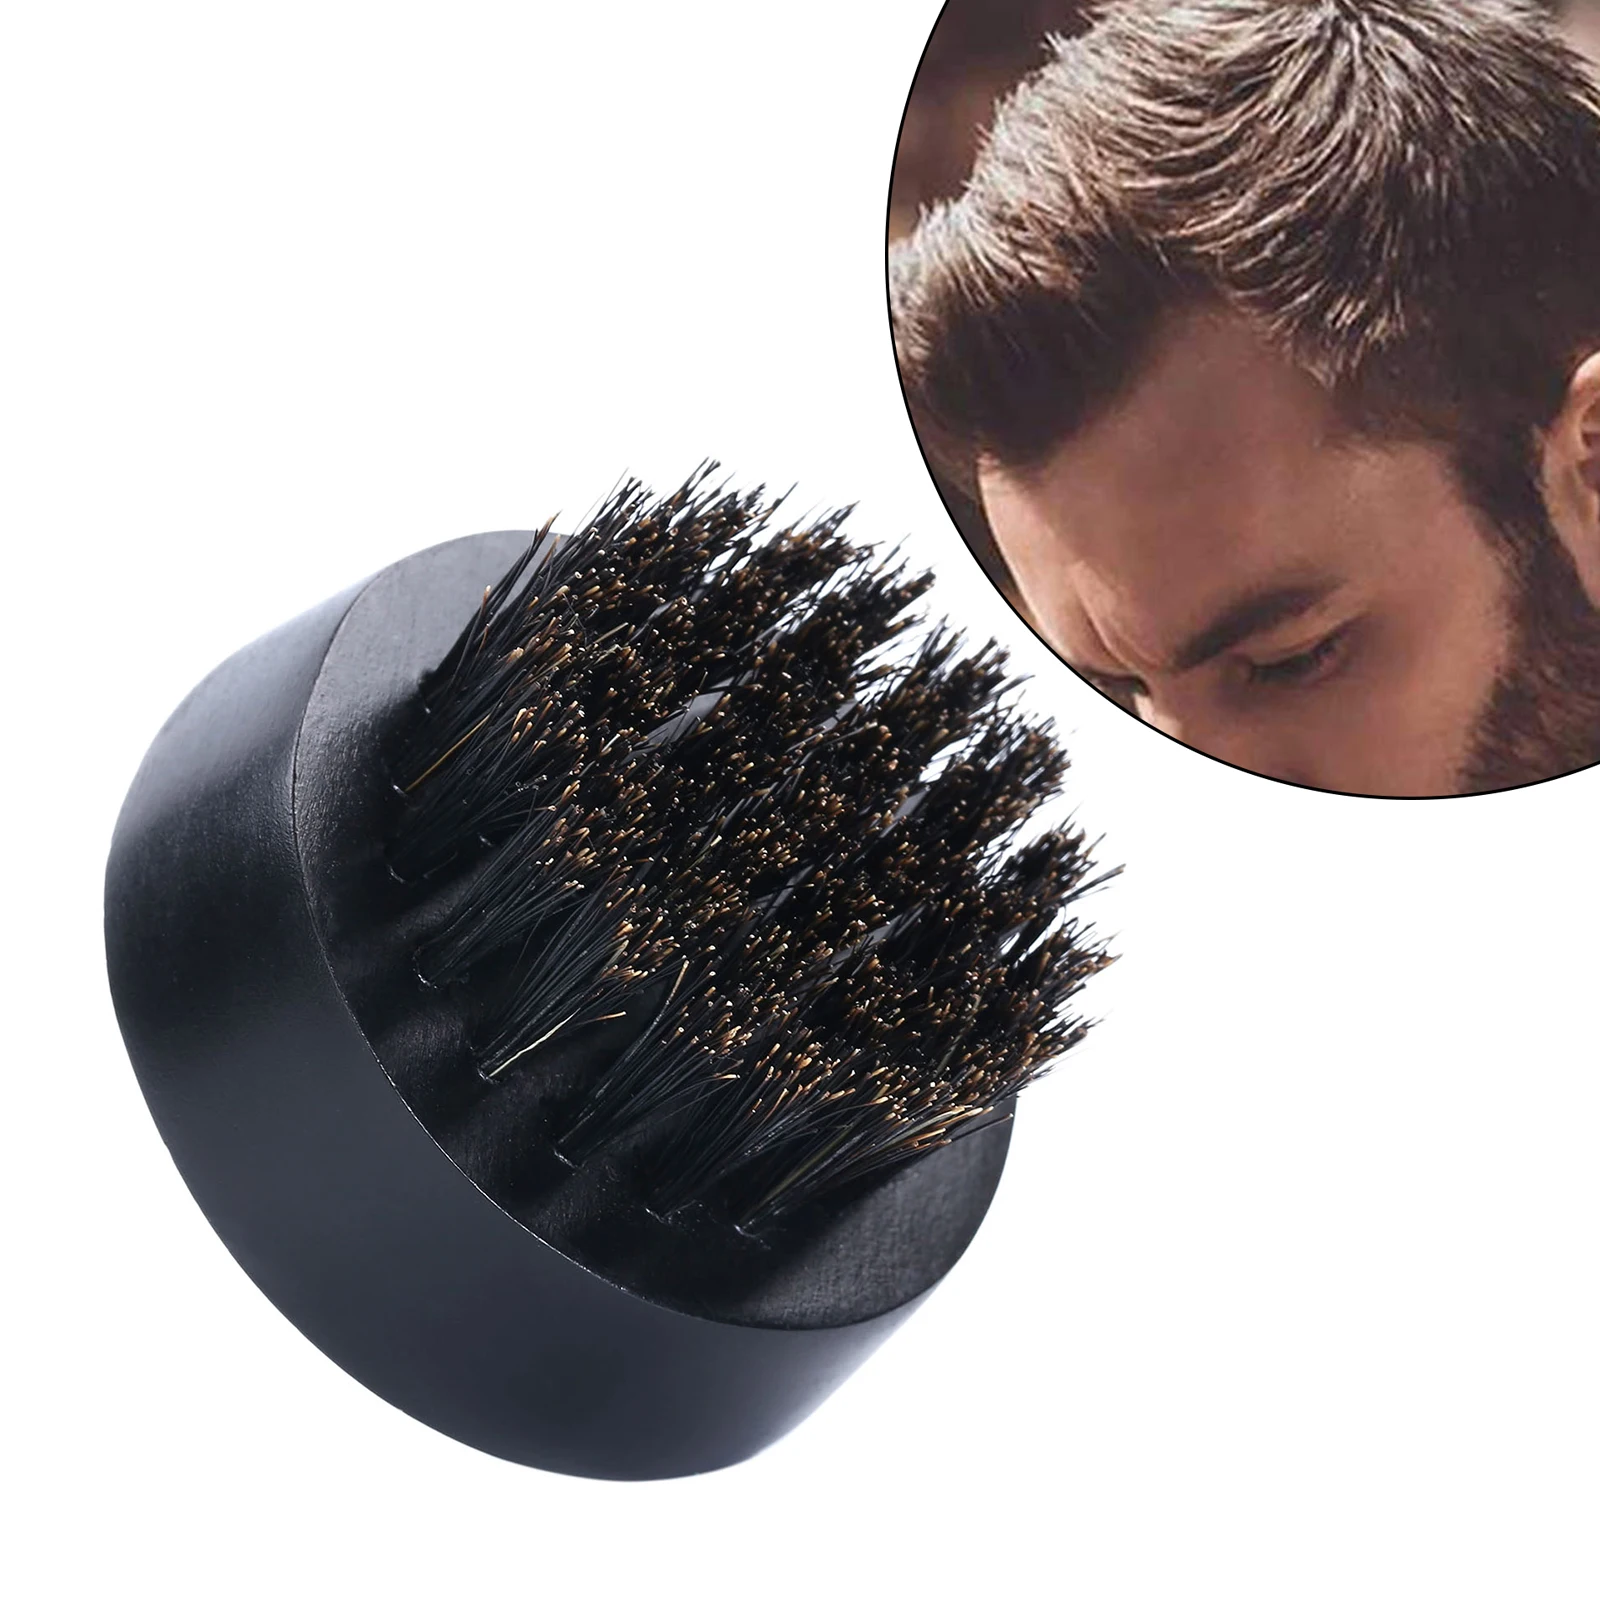 Wooden Hair Beard Brush Tame Hair Soften Your Facial Small and Round with Wooden Handle Styling Tools Grooming for Barber Men